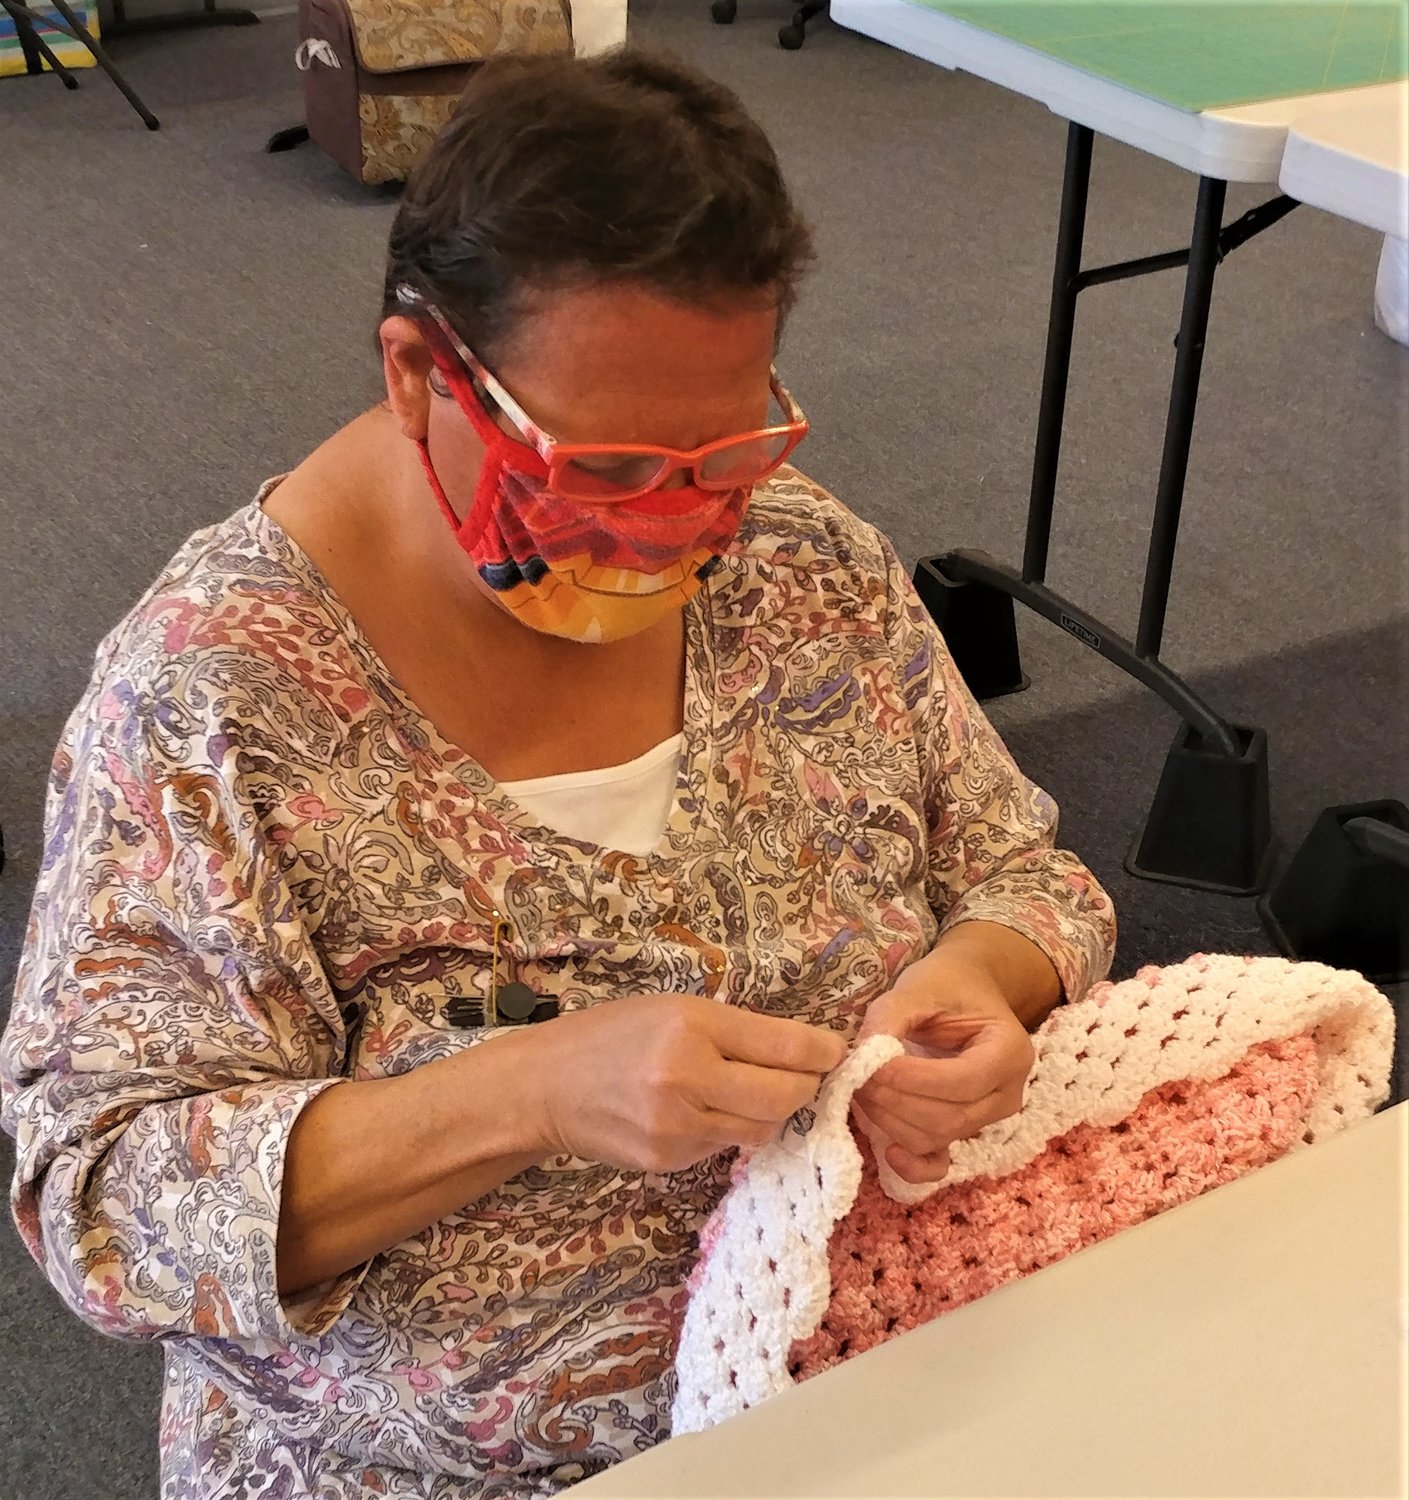 Project Linus Las Cruces chapter member Ginny Knowles sewing a blanket at ThreadBear, 2205 S. Main St.